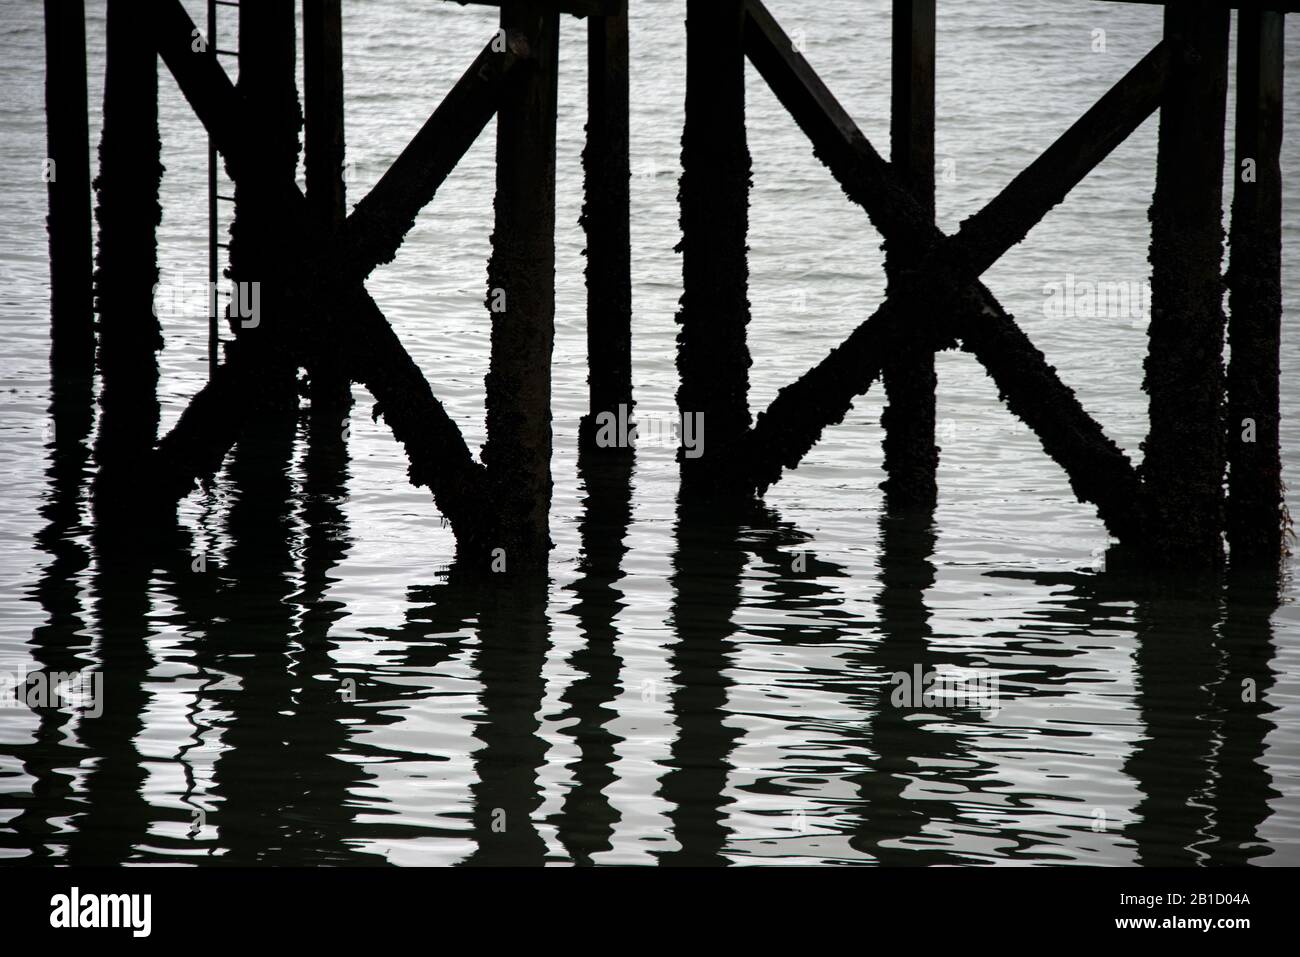 A monotone silhouette of the wooden legs of an old jetty and their reflection in a river. Stock Photo